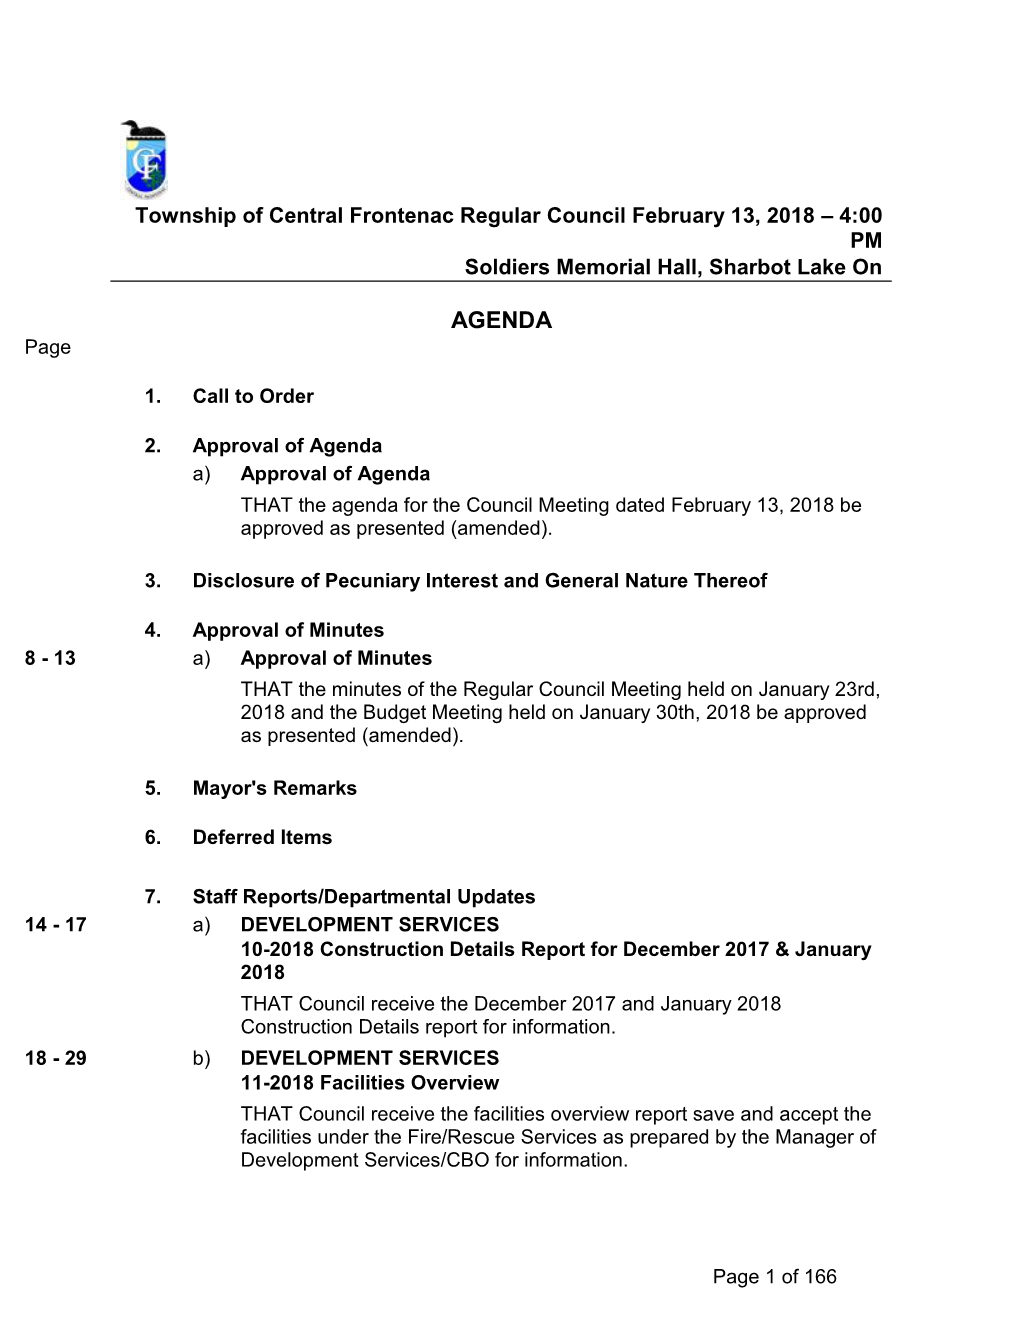 Township of Central Frontenac Regular Council February 13, 2018 – 4:00 PM Soldiers Memorial Hall, Sharbot Lake On